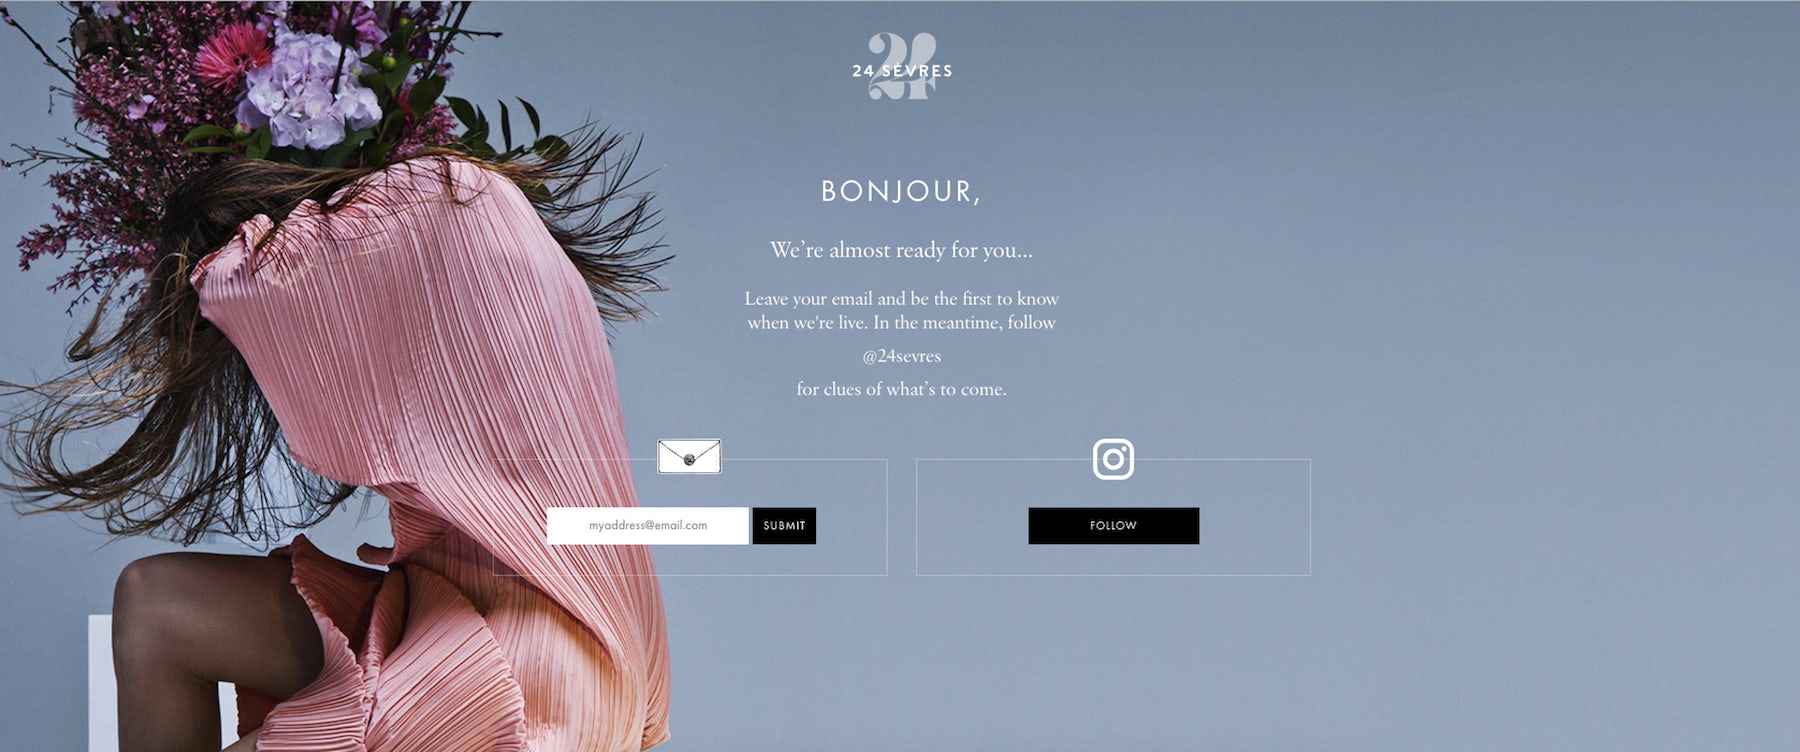 LVMH launches new corporate website - LVMH